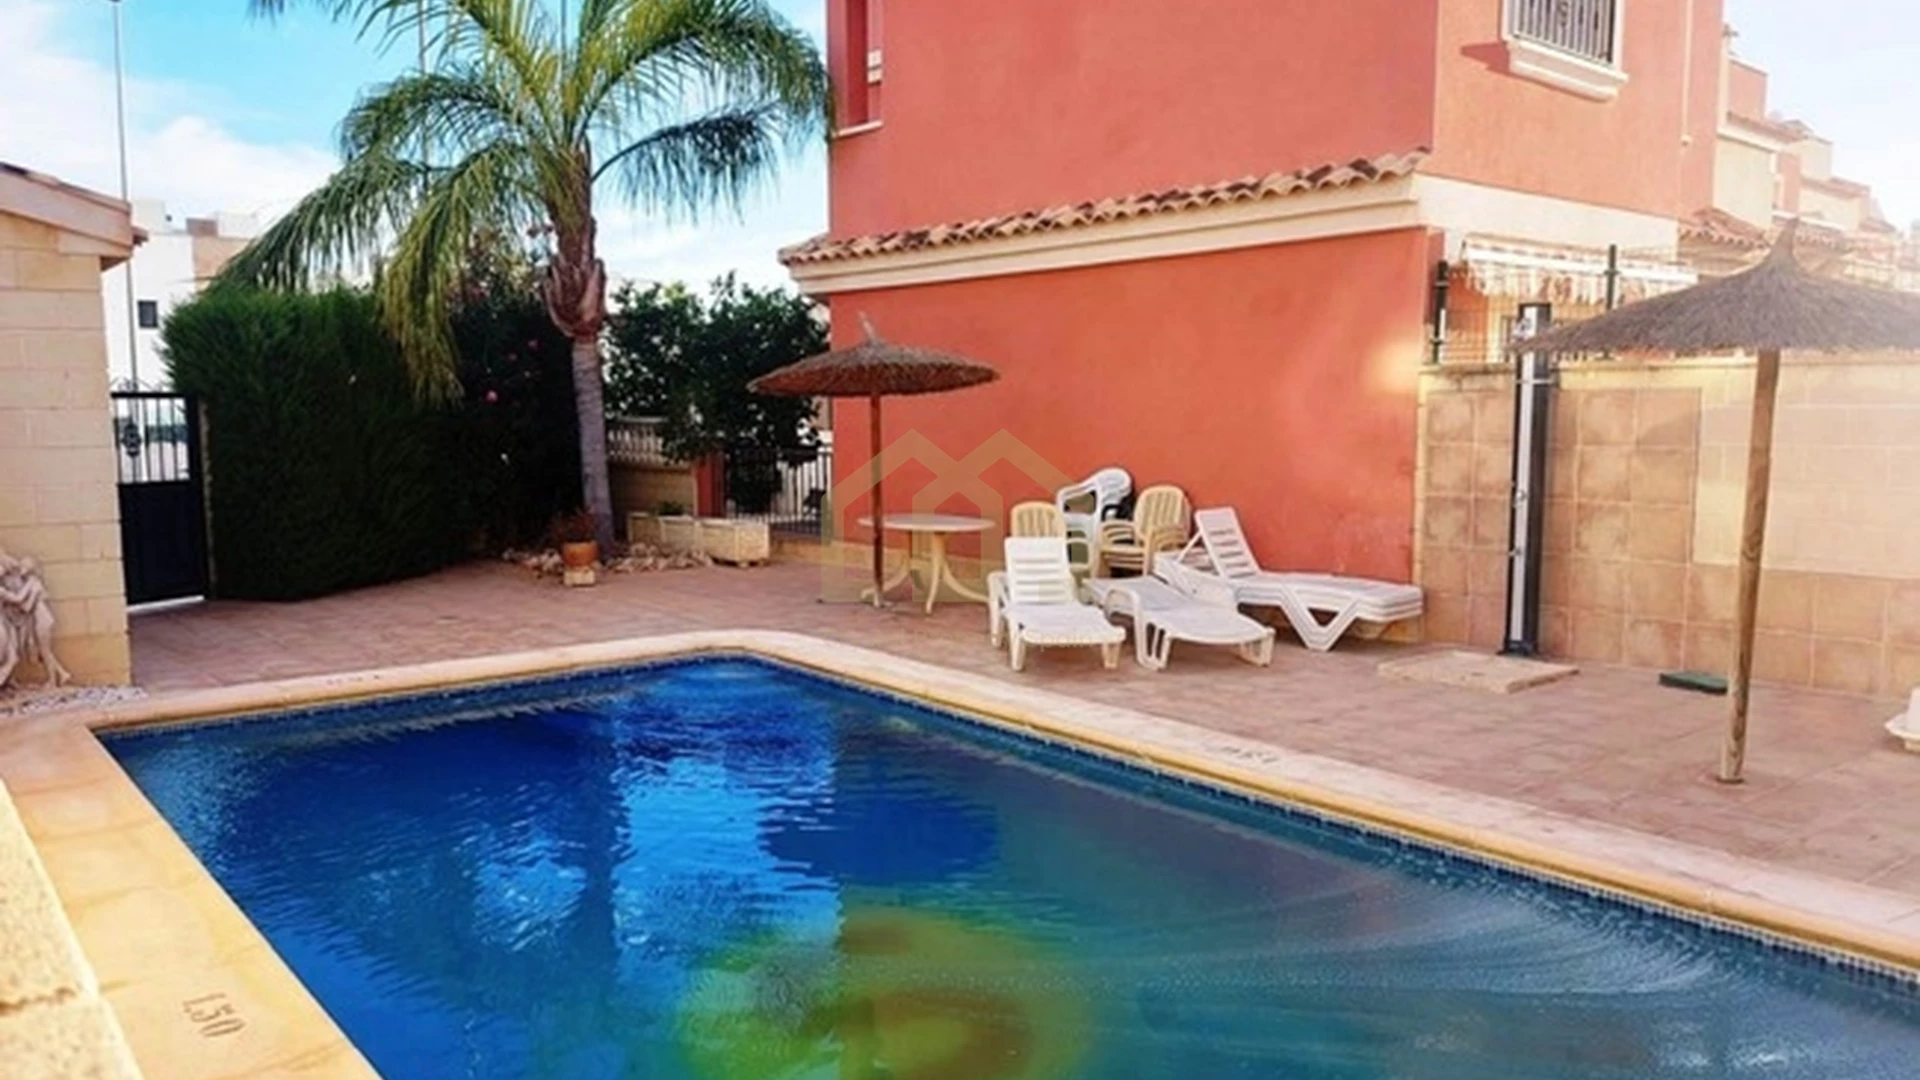 Orihuela, Villamartín, Duplex apartment, CPL1/176, Wonderful townhouse in Villamartin with proximity to all services and communal pool.